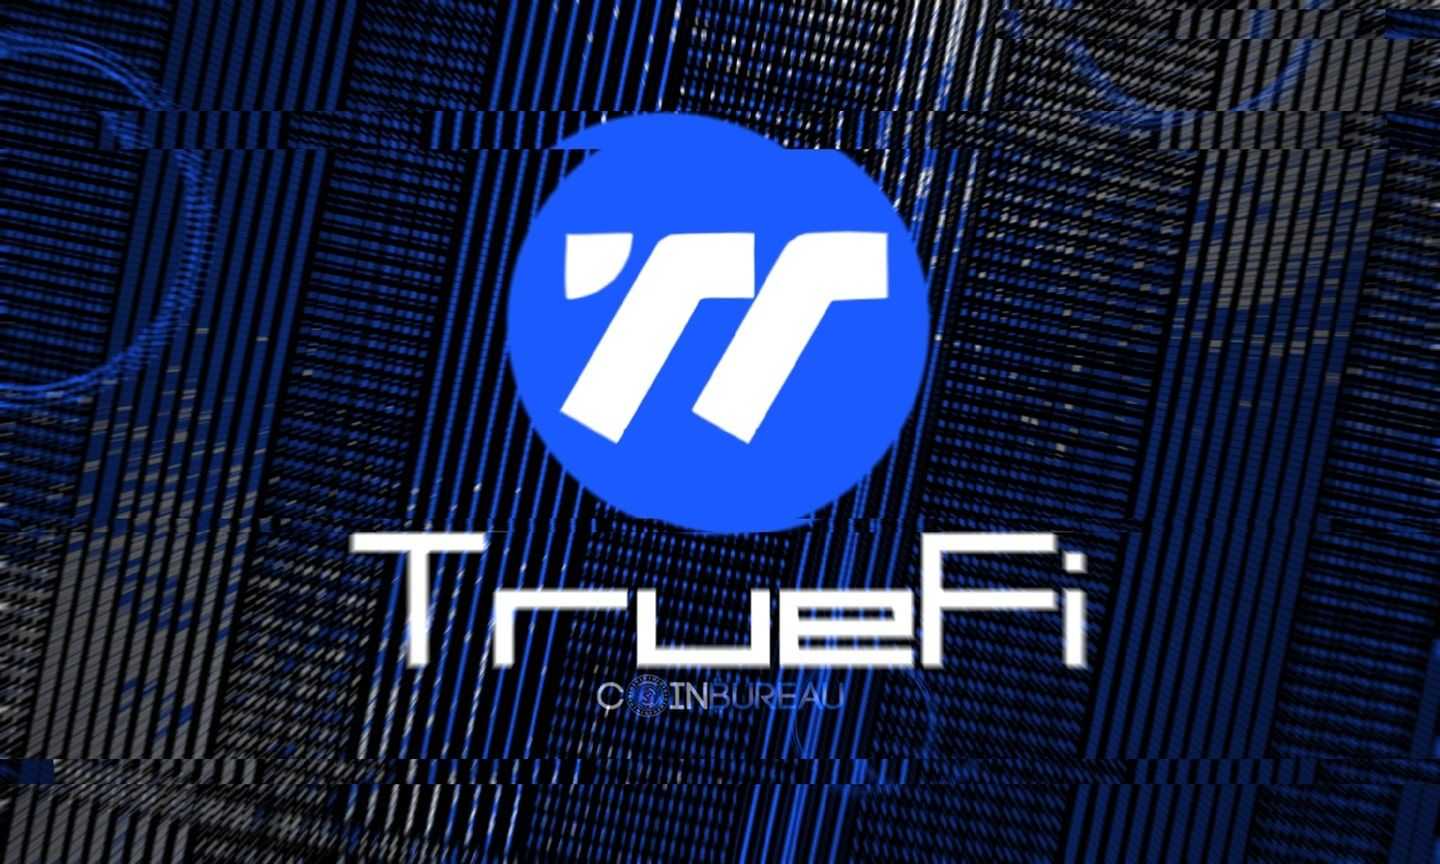 TrueFi Centralized Decentralized Finance - Is "CeDeFi" The Future of Crypto?